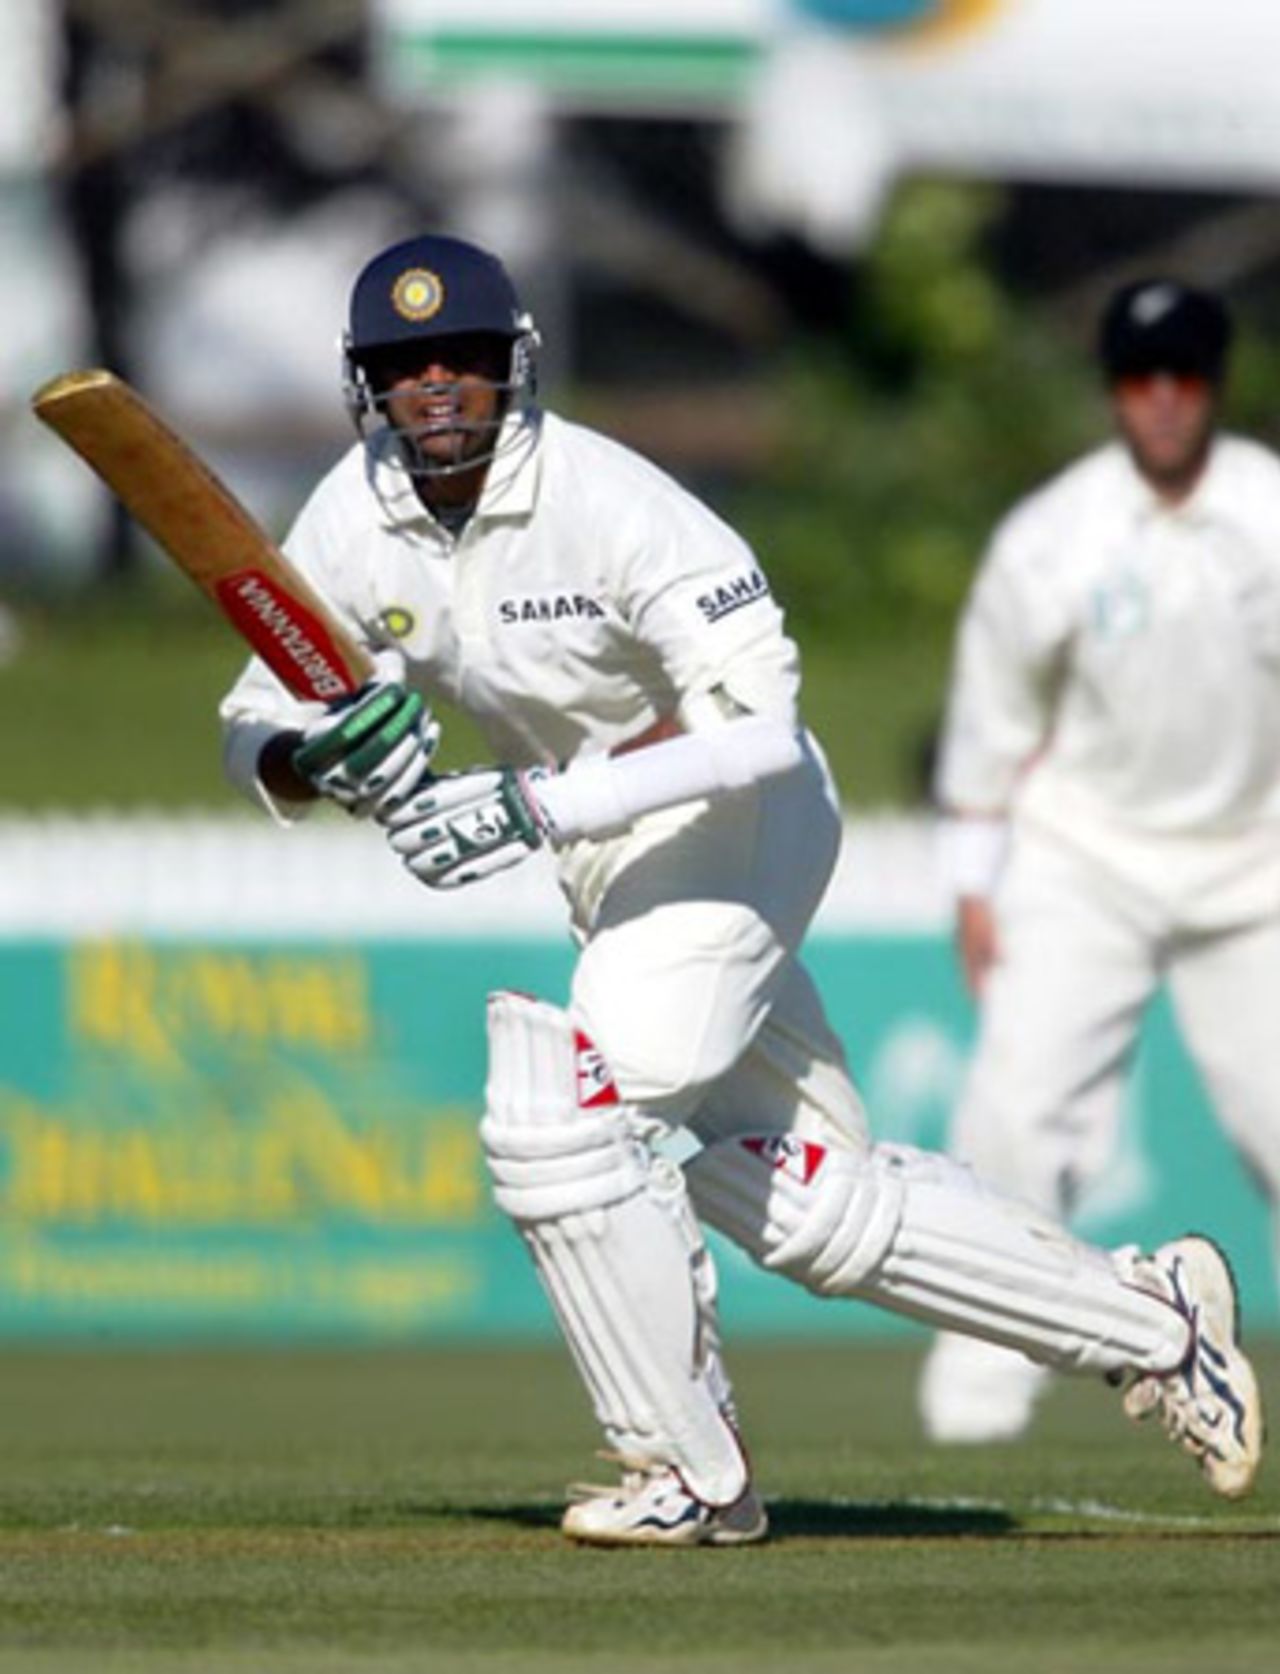 Indian batsman Rahul Dravid plays a delivery to the leg side during his first innings of nine. 2nd Test: New Zealand v India at Westpac Park, Hamilton, 19-23 December 2002 (20 December 2002).